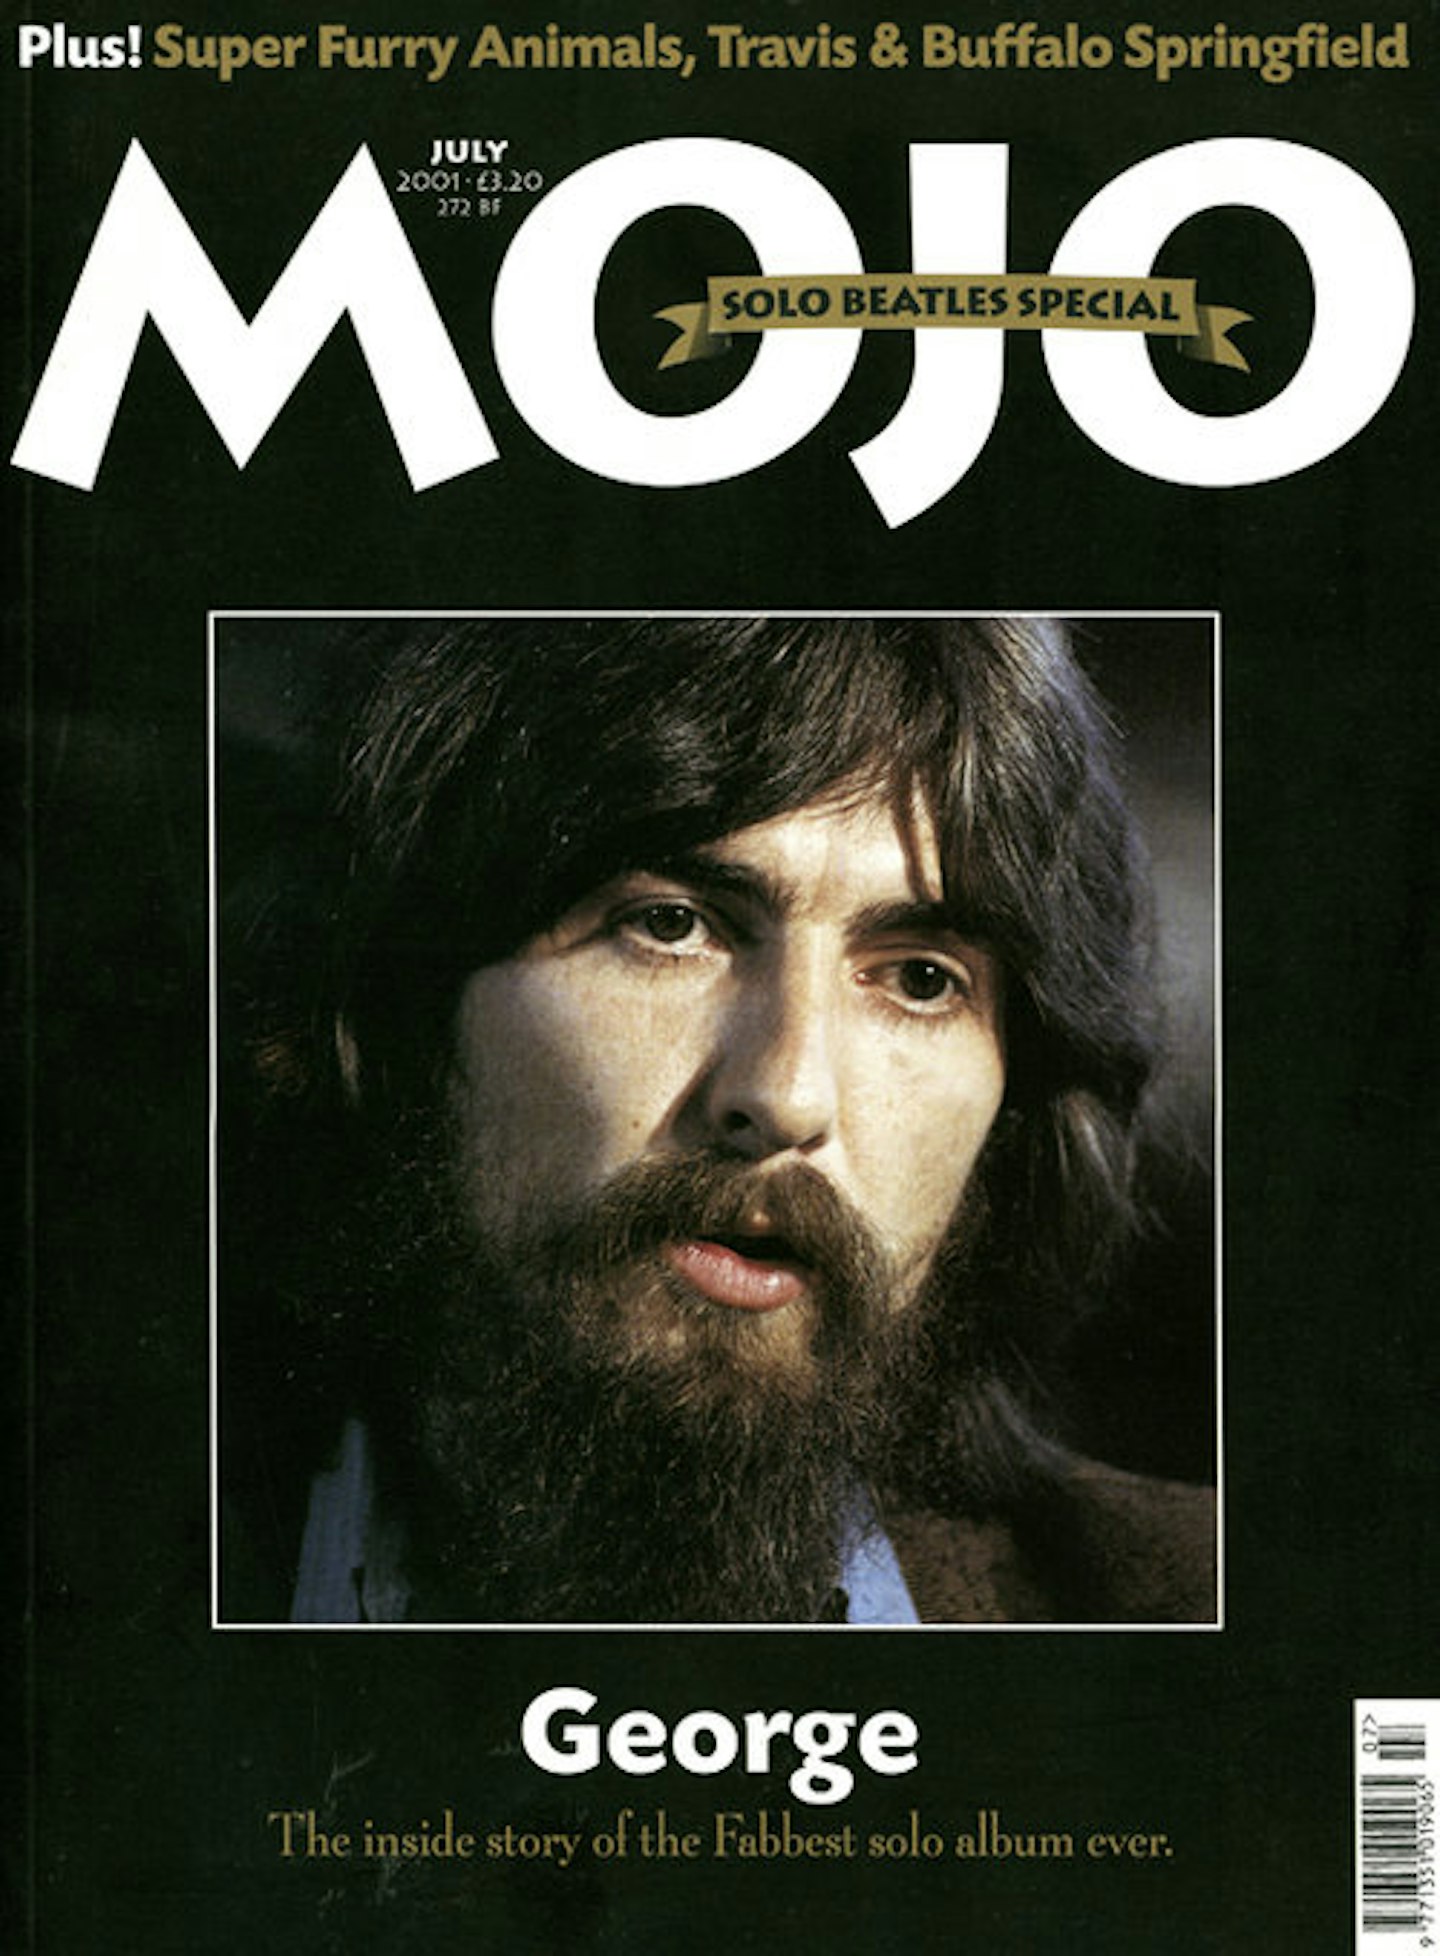 MOJO Issue 92 / July 2001 / George